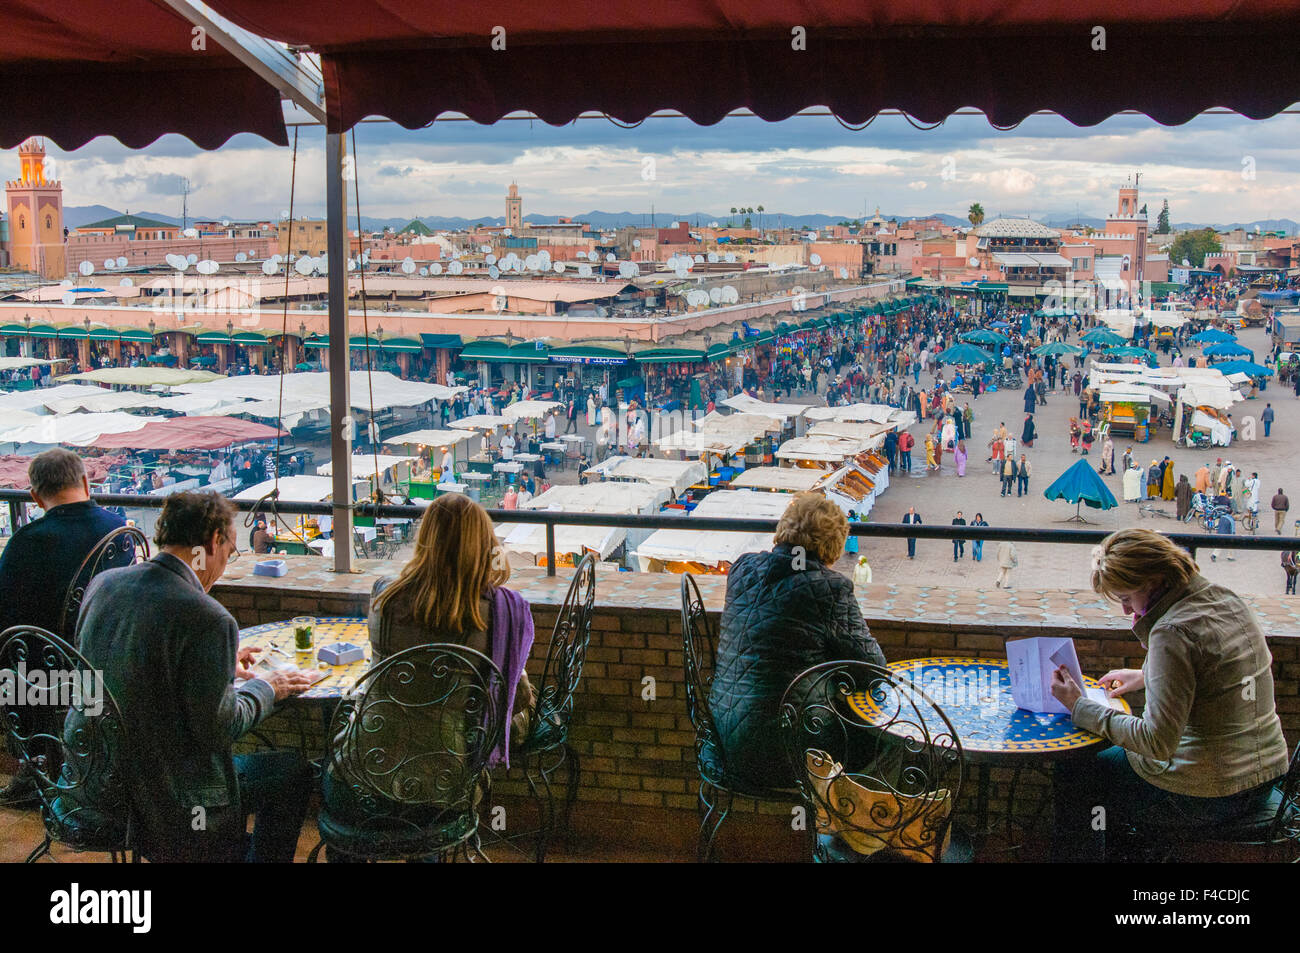 View of Place Jemaa El Fna from the terrace of Cafe' Glacier, Place Jemaa El Fna (Djemaa El Fna), Marrakech, Morocco. Stock Photo